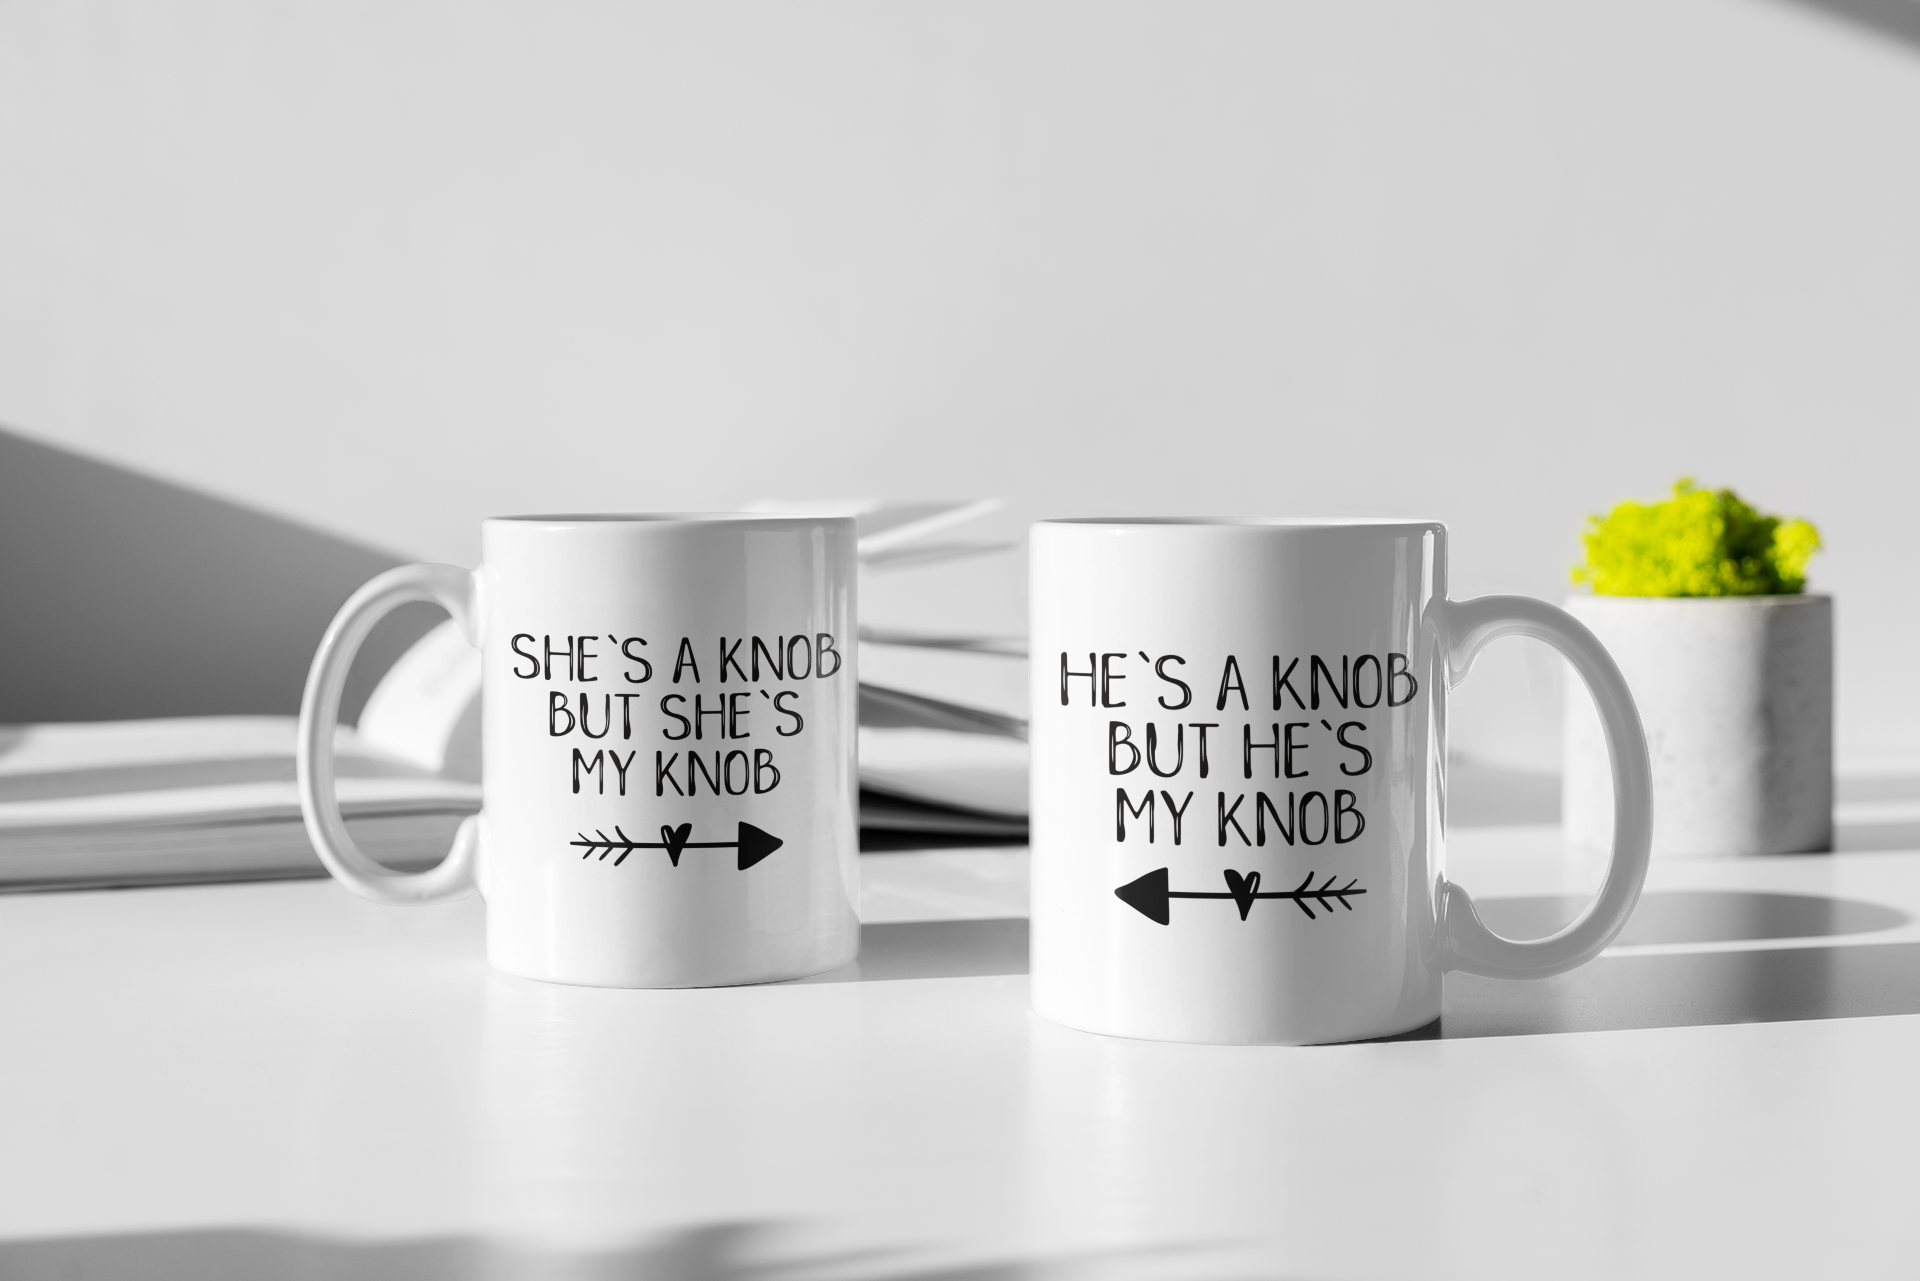 A pair of white ceramic mugs. One has 'he's a knob, but he's my knob' with an arrow underneath pointing to the left. The other has 'she's a knob, but she's my knob' with the arrow pointing to the right. Both printed to the front in black ink.